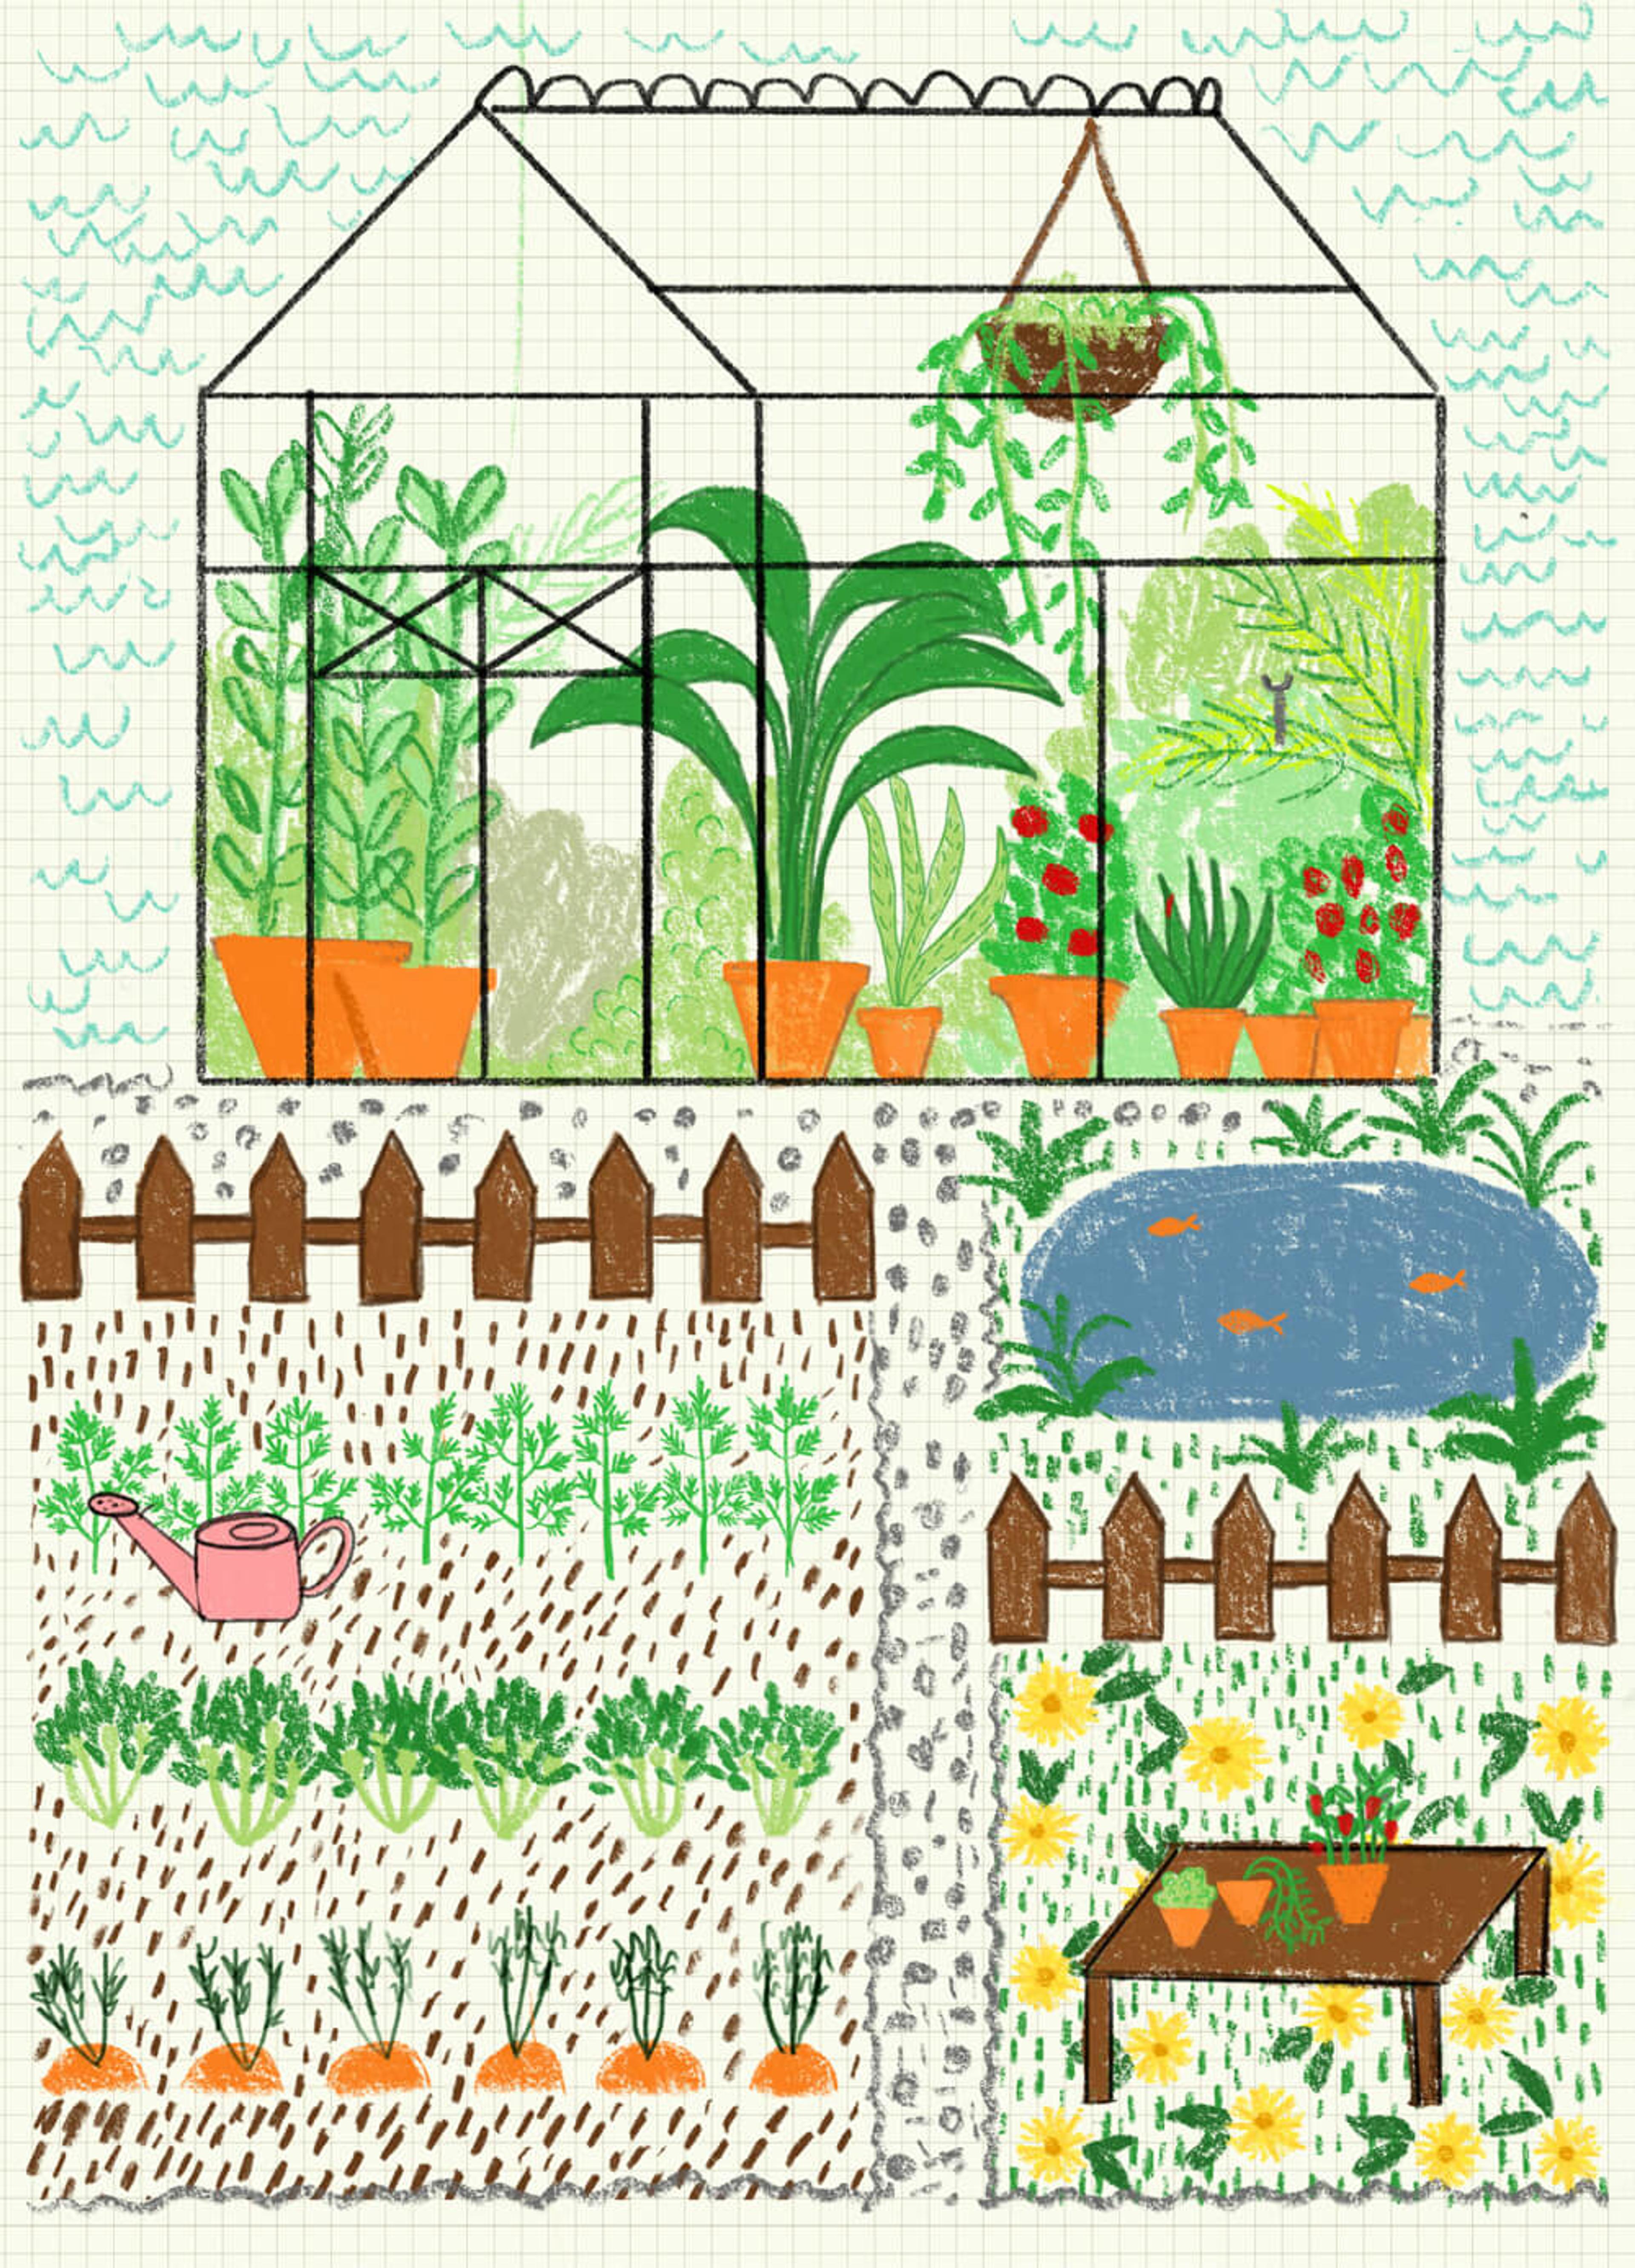 Illustration of a greenhouse full of plants